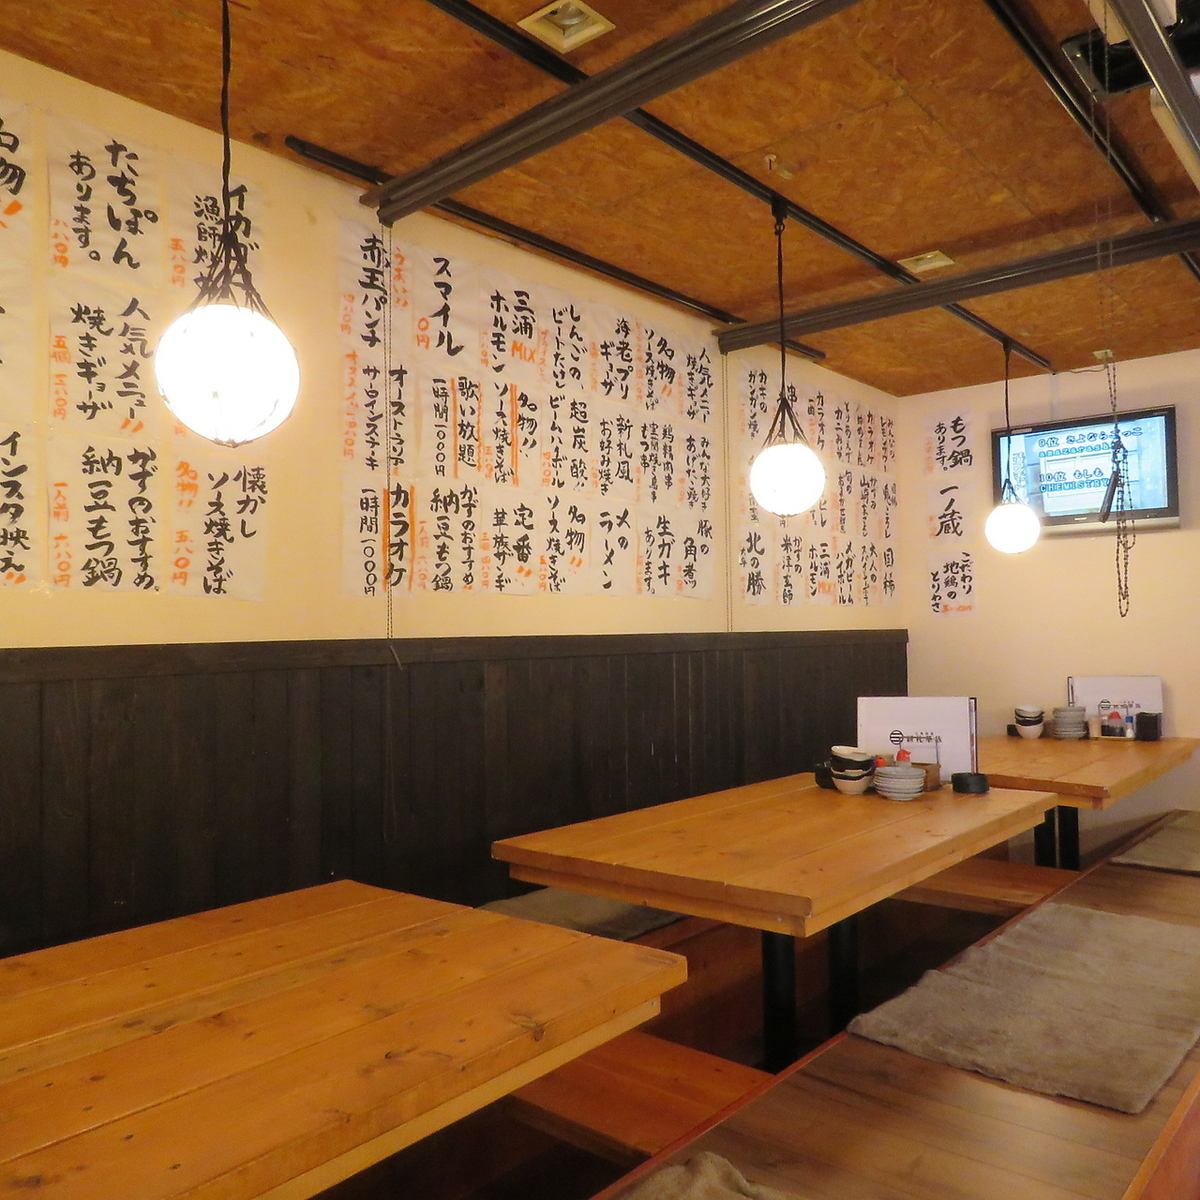 We have a private room with horigotatsu that can be used by 2 to 16 people.